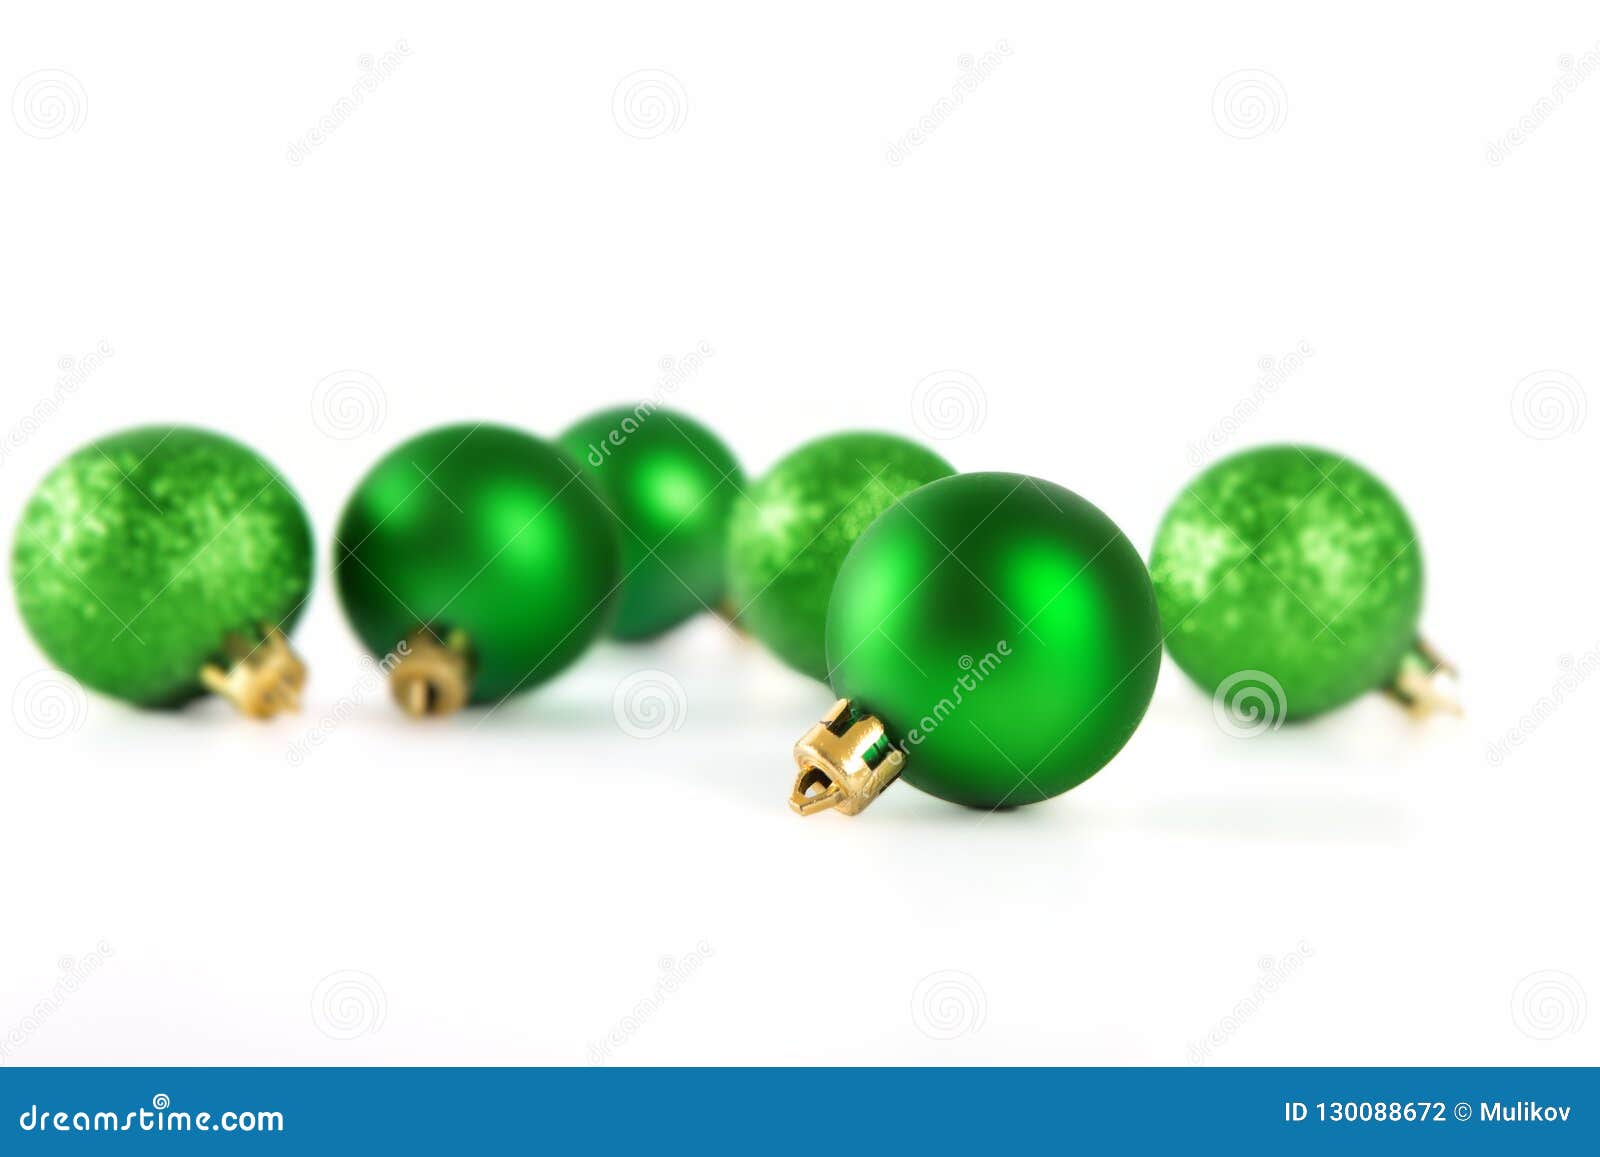 Colorful Green Christmas Decoration Baubles on White Background Stock ...